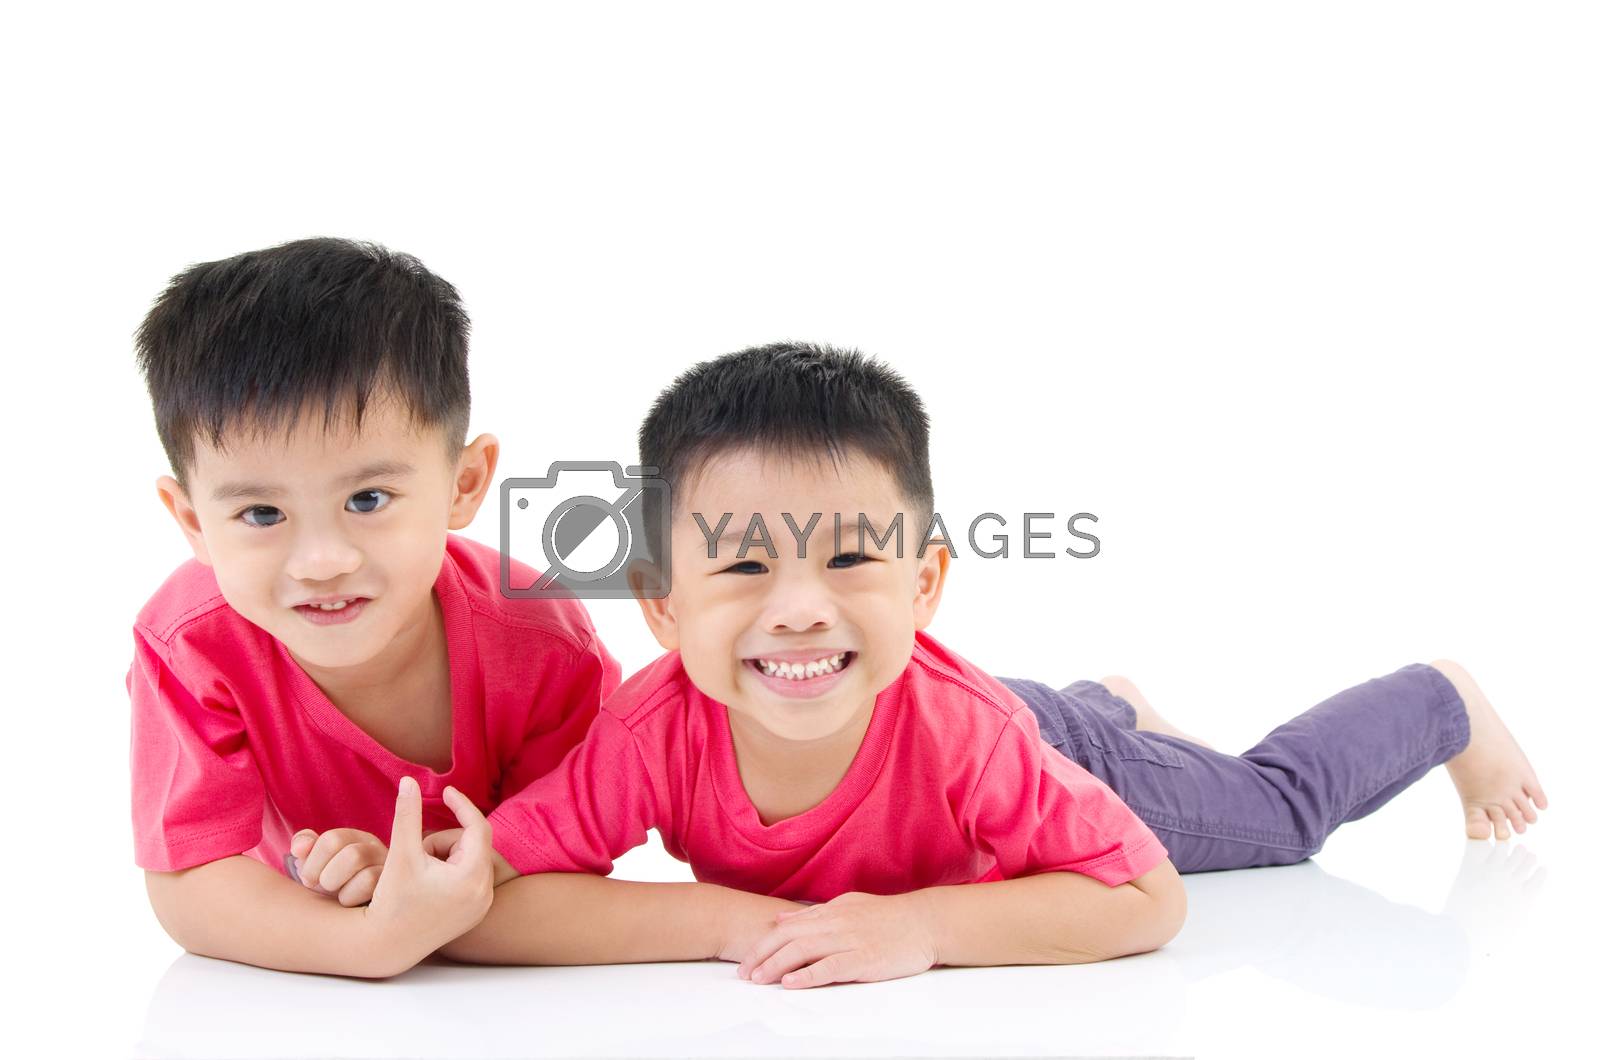 Royalty free image of Asian kids by yongtick